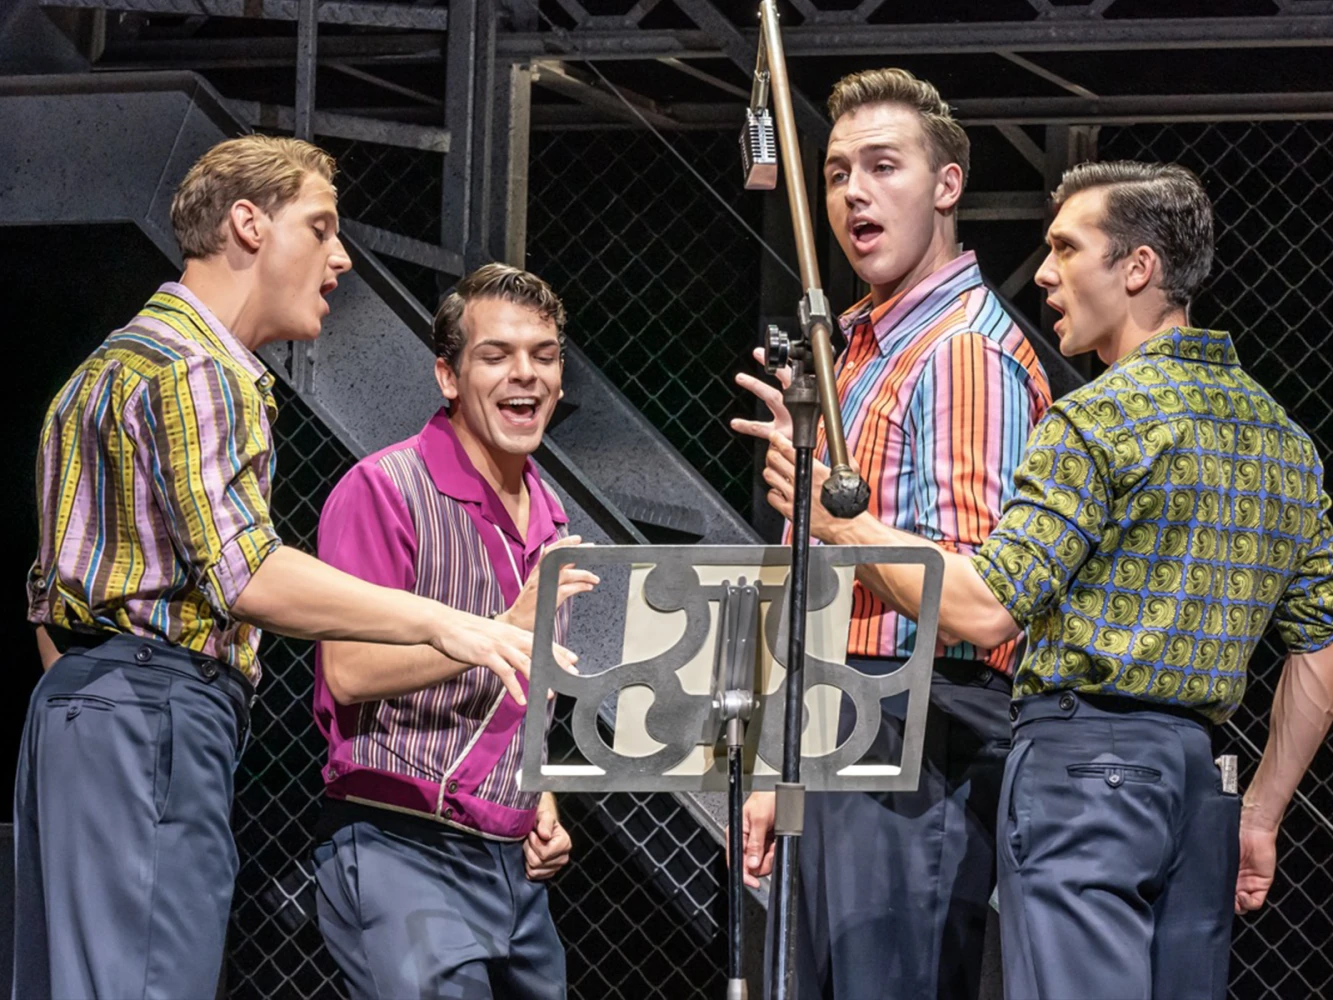 Jersey Boys: What to expect - 3